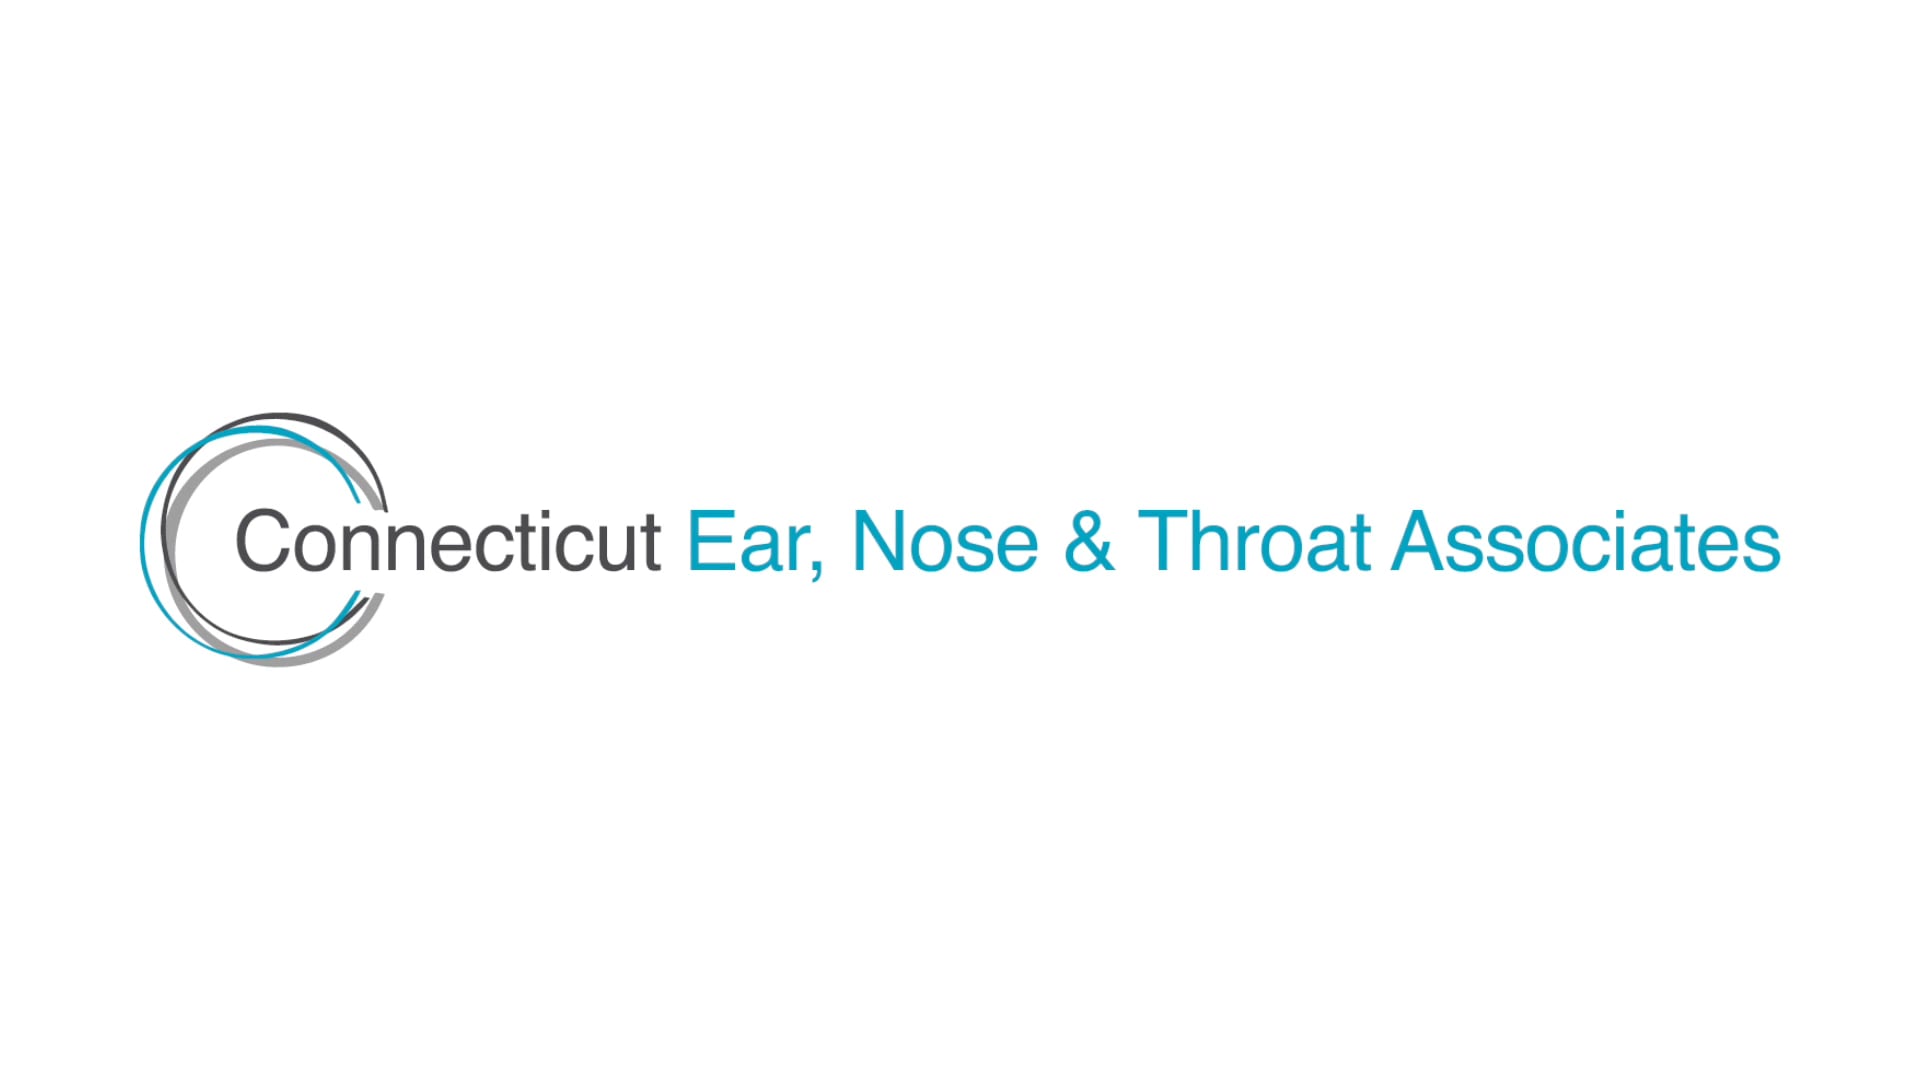 Connecticut Ear, Nose and Throat